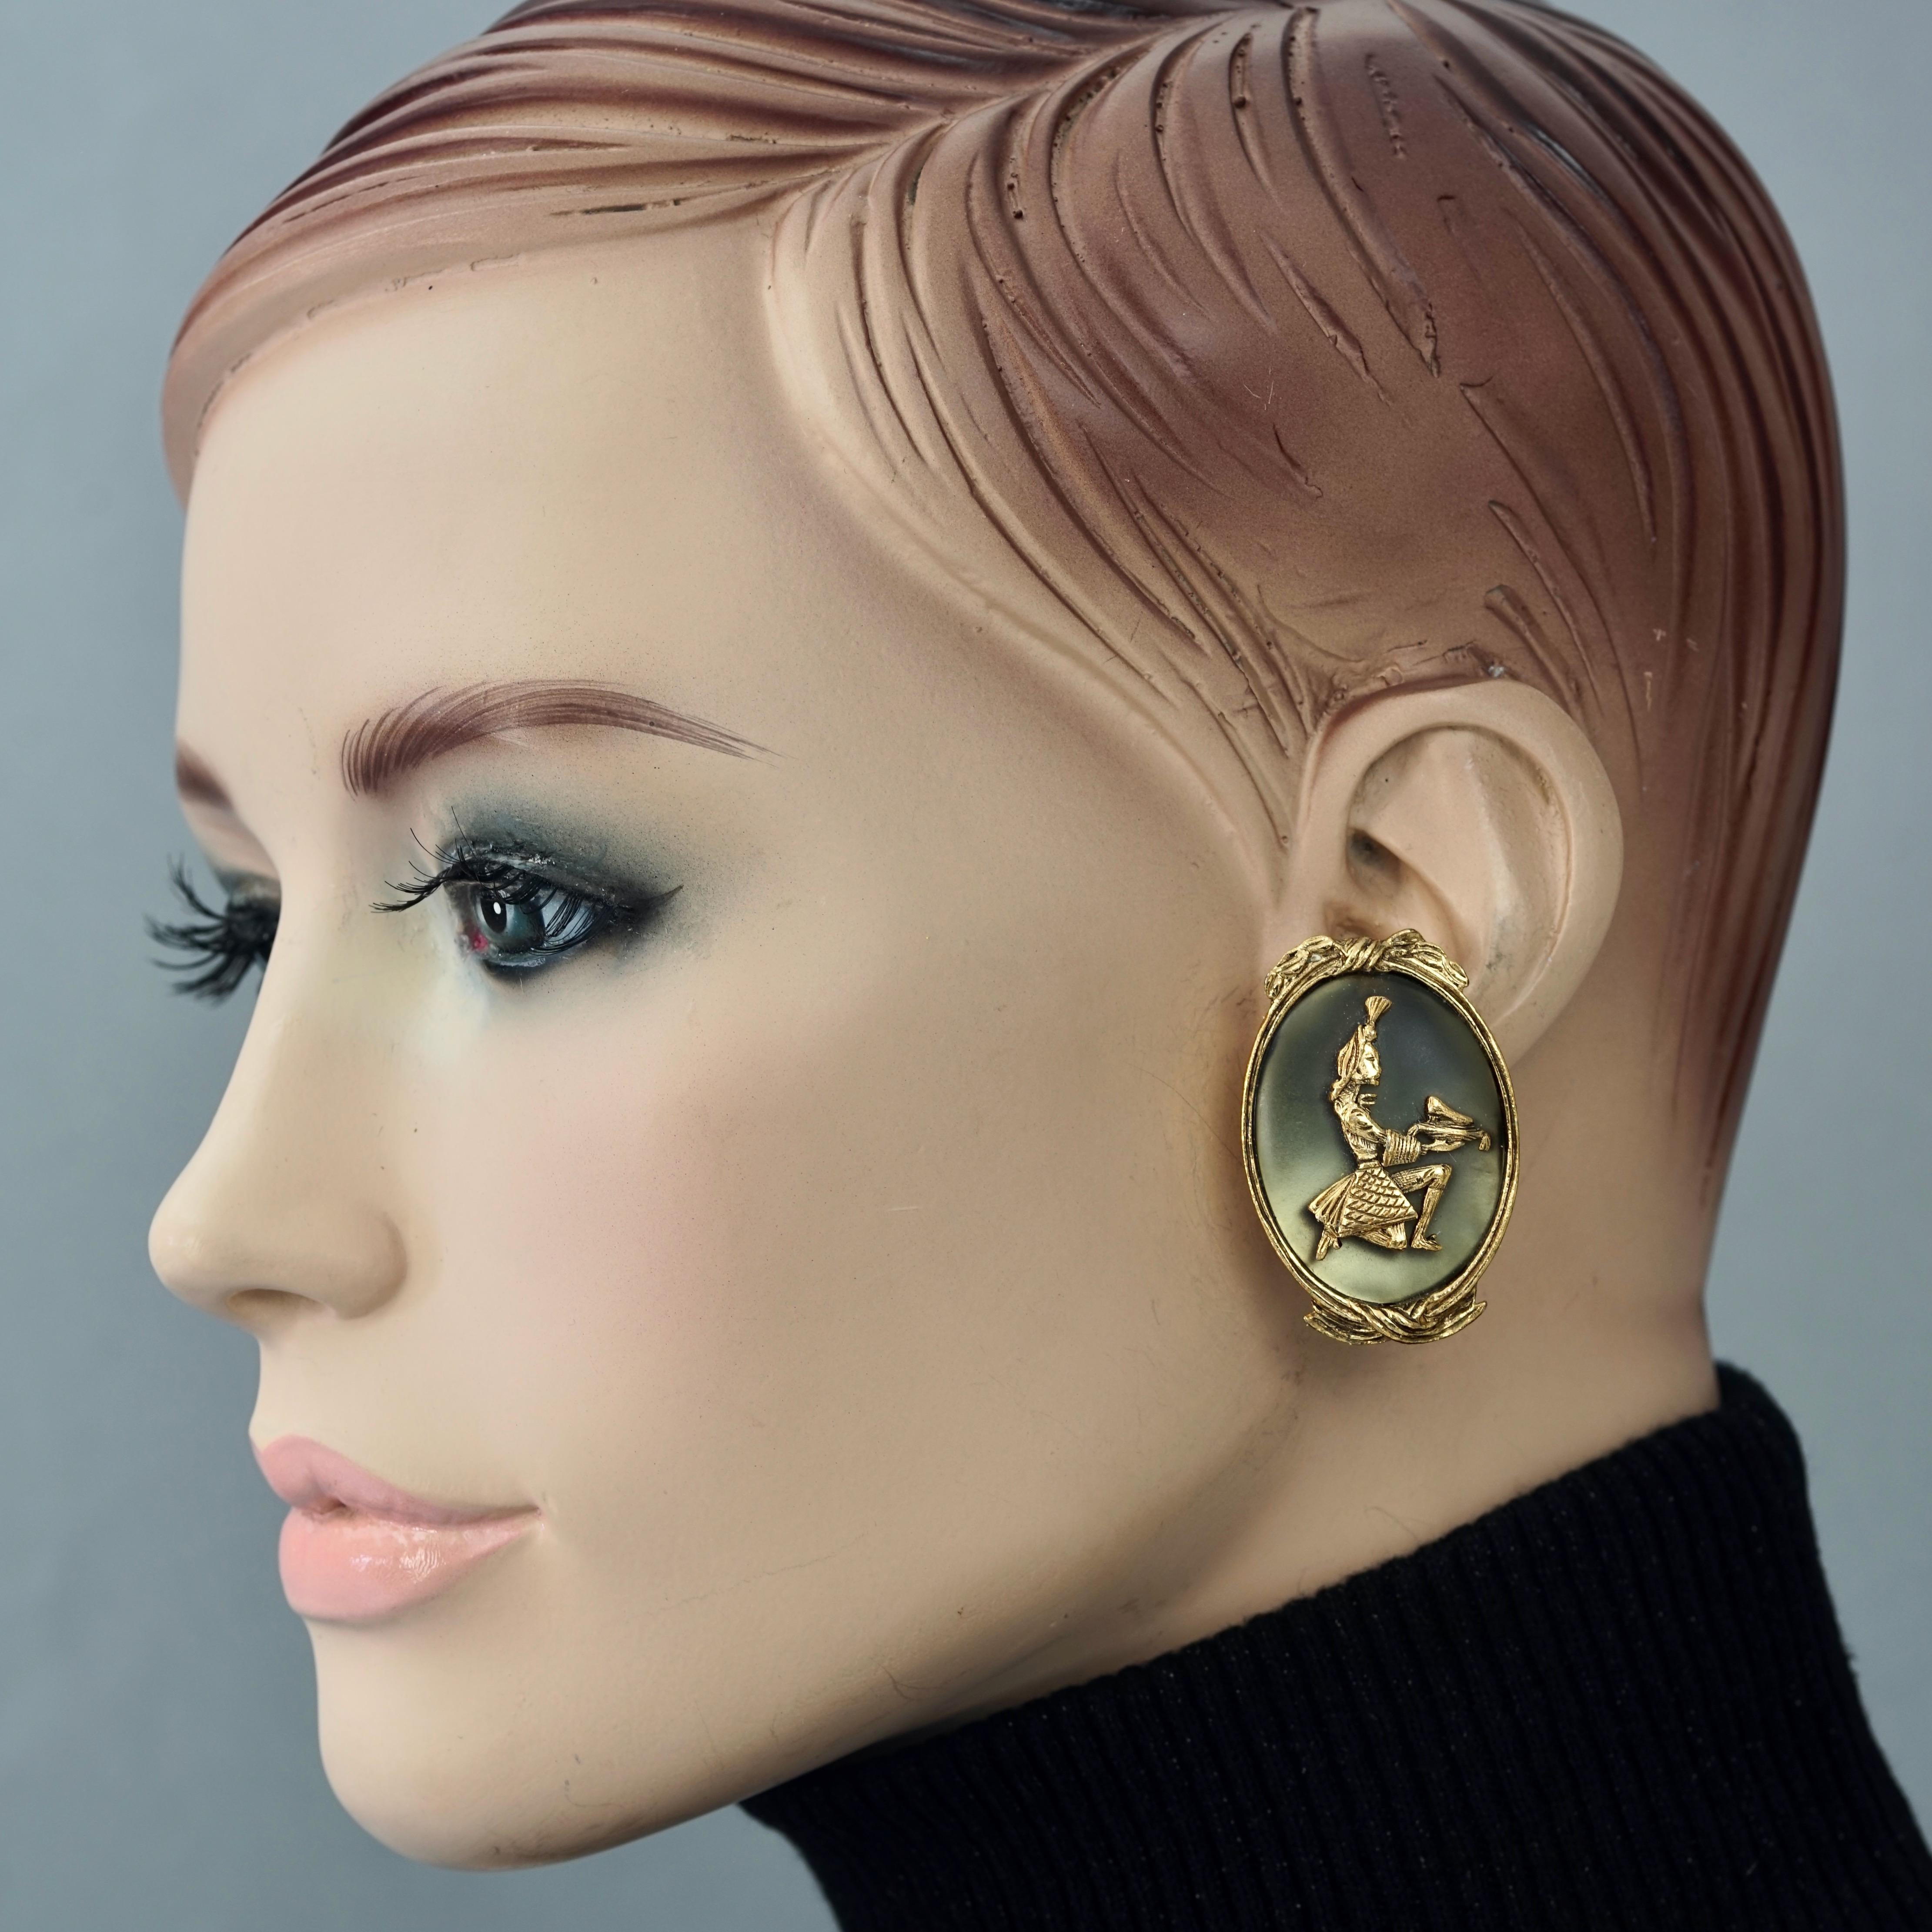 Vintage CHARLES JOURDAN Figural Earrings

Measurements:
Large Discs: 1.65 inches (4.2 cm)
Small Discs: 1.10 inches (2.8 cm)
Weight per Earring: 18 grams

Features:
- Authentic CHARLES JOURDAN PARIS.
- Oval earrings with olive resin and lady figure